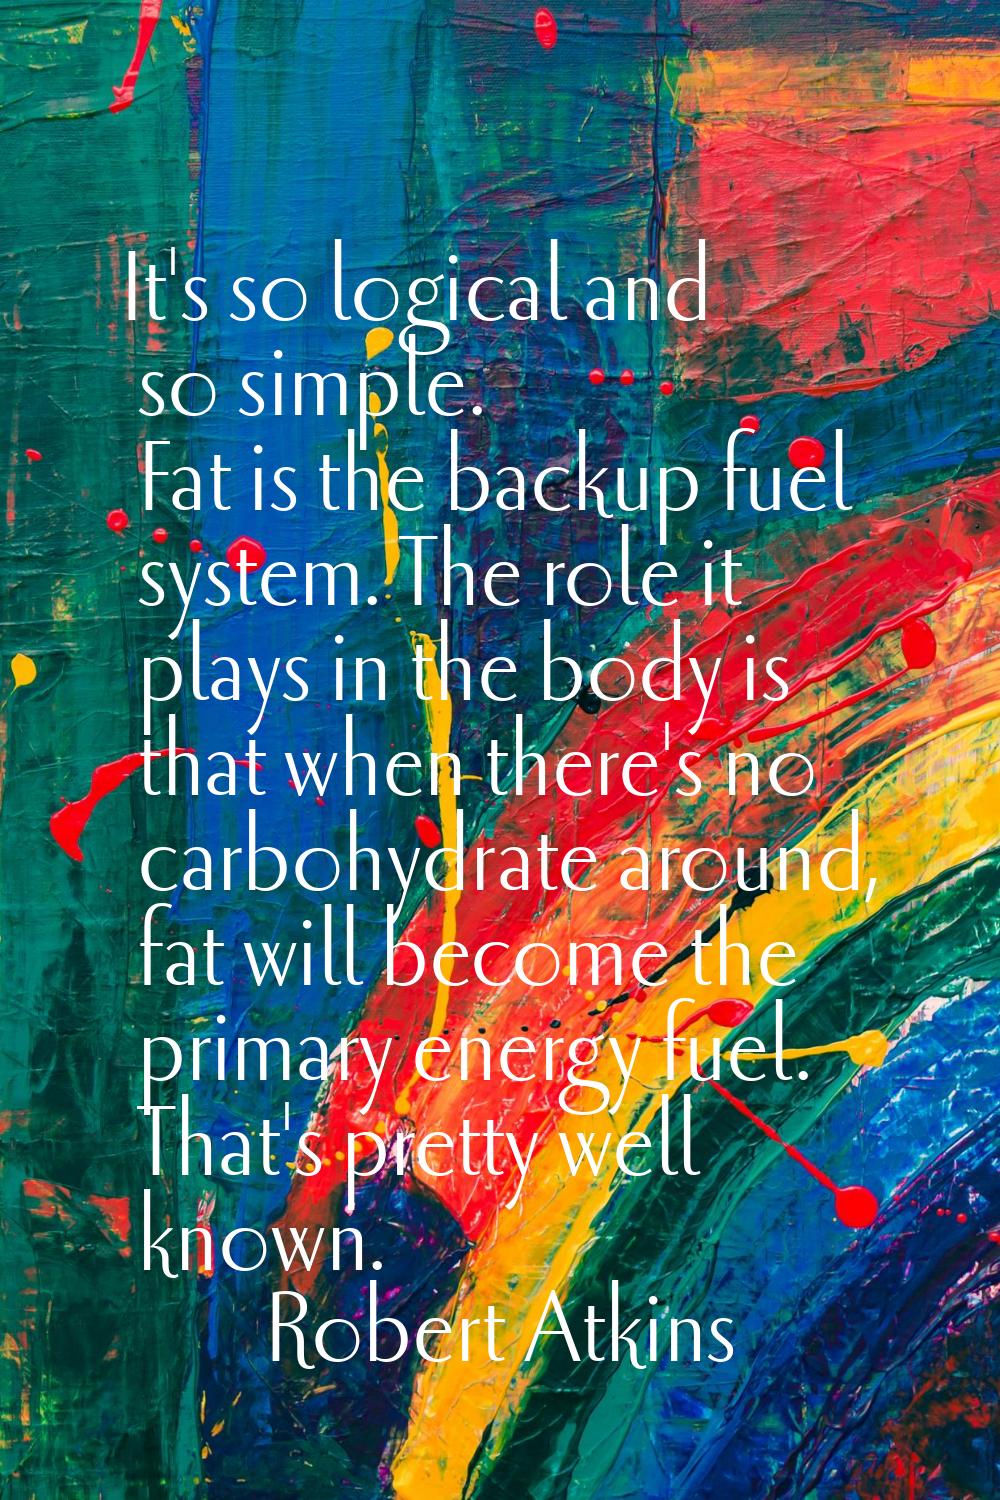 It's so logical and so simple. Fat is the backup fuel system. The role it plays in the body is that